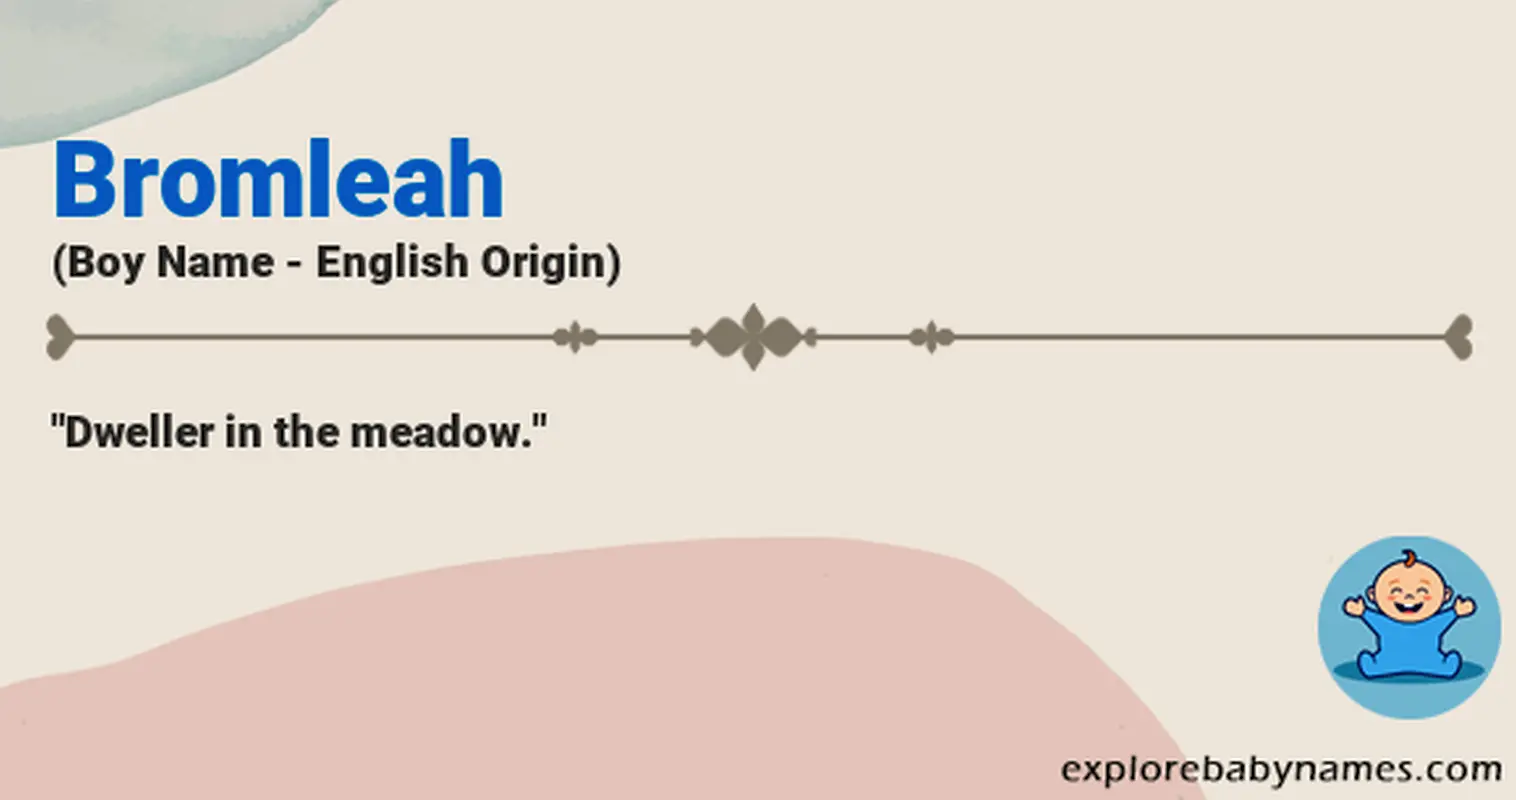 Meaning of Bromleah